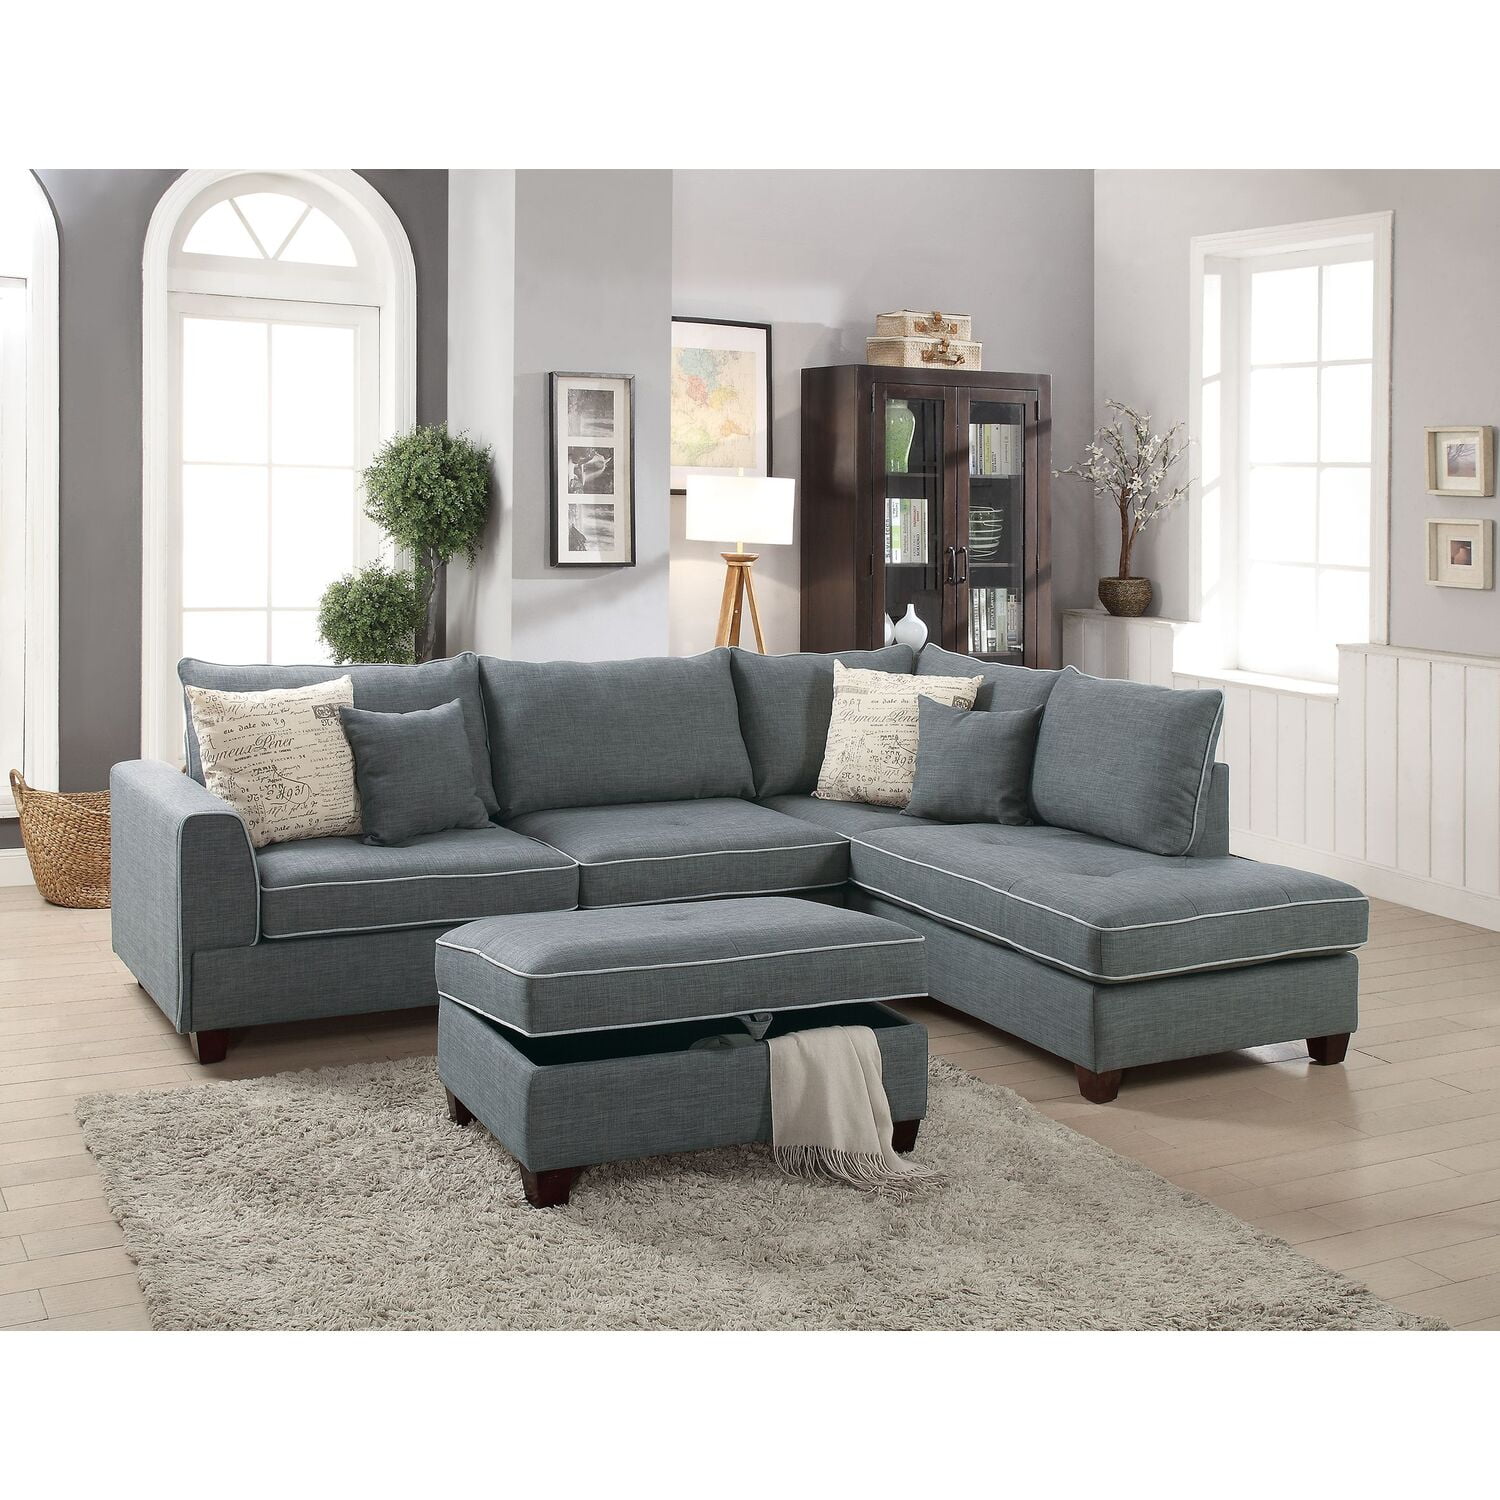 Bobkona Rianne Dorris Reversible Sectional with Storage Ottoman set in ...